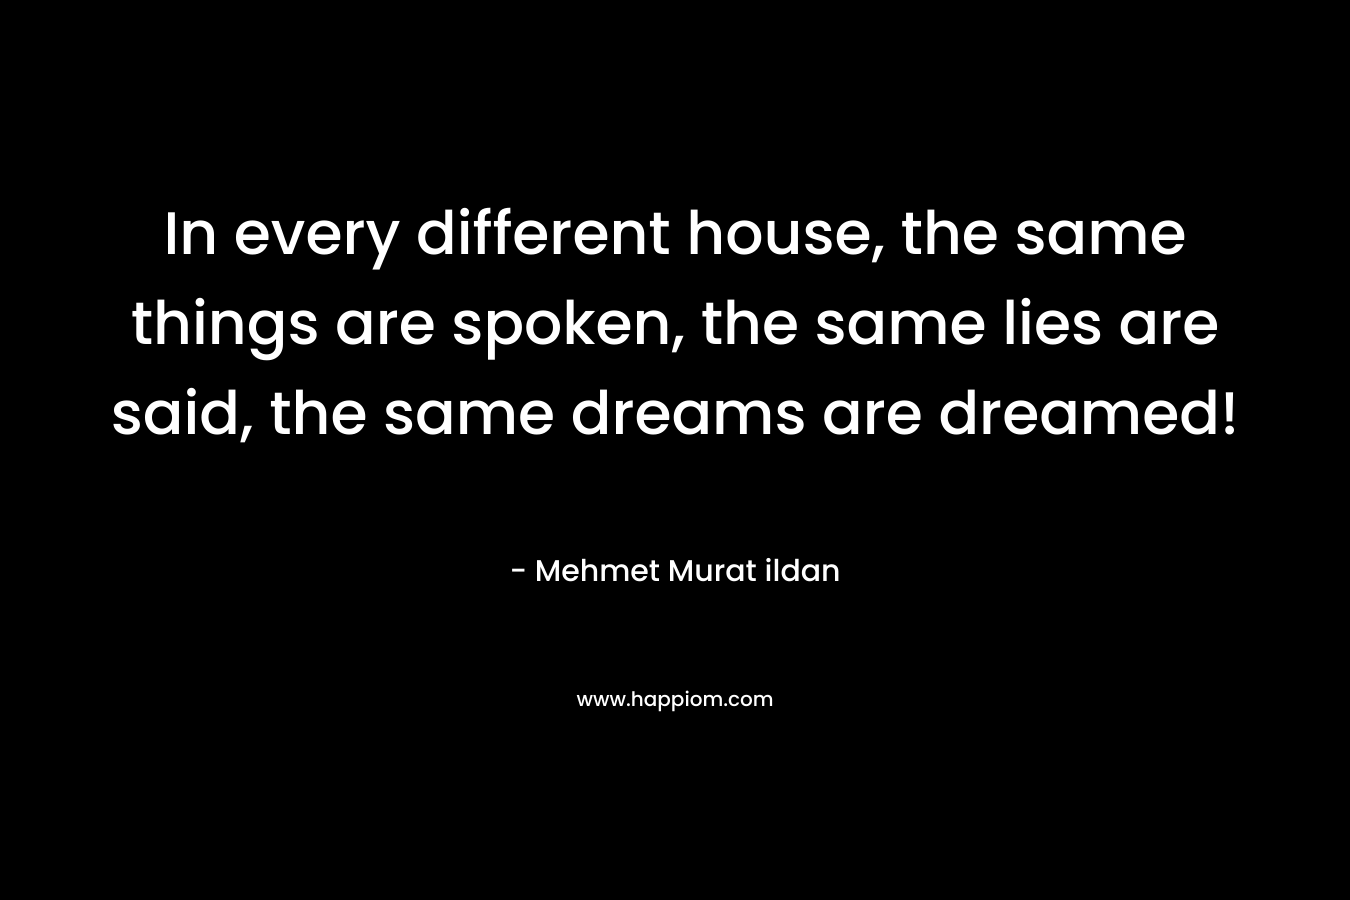 In every different house, the same things are spoken, the same lies are said, the same dreams are dreamed! – Mehmet Murat ildan